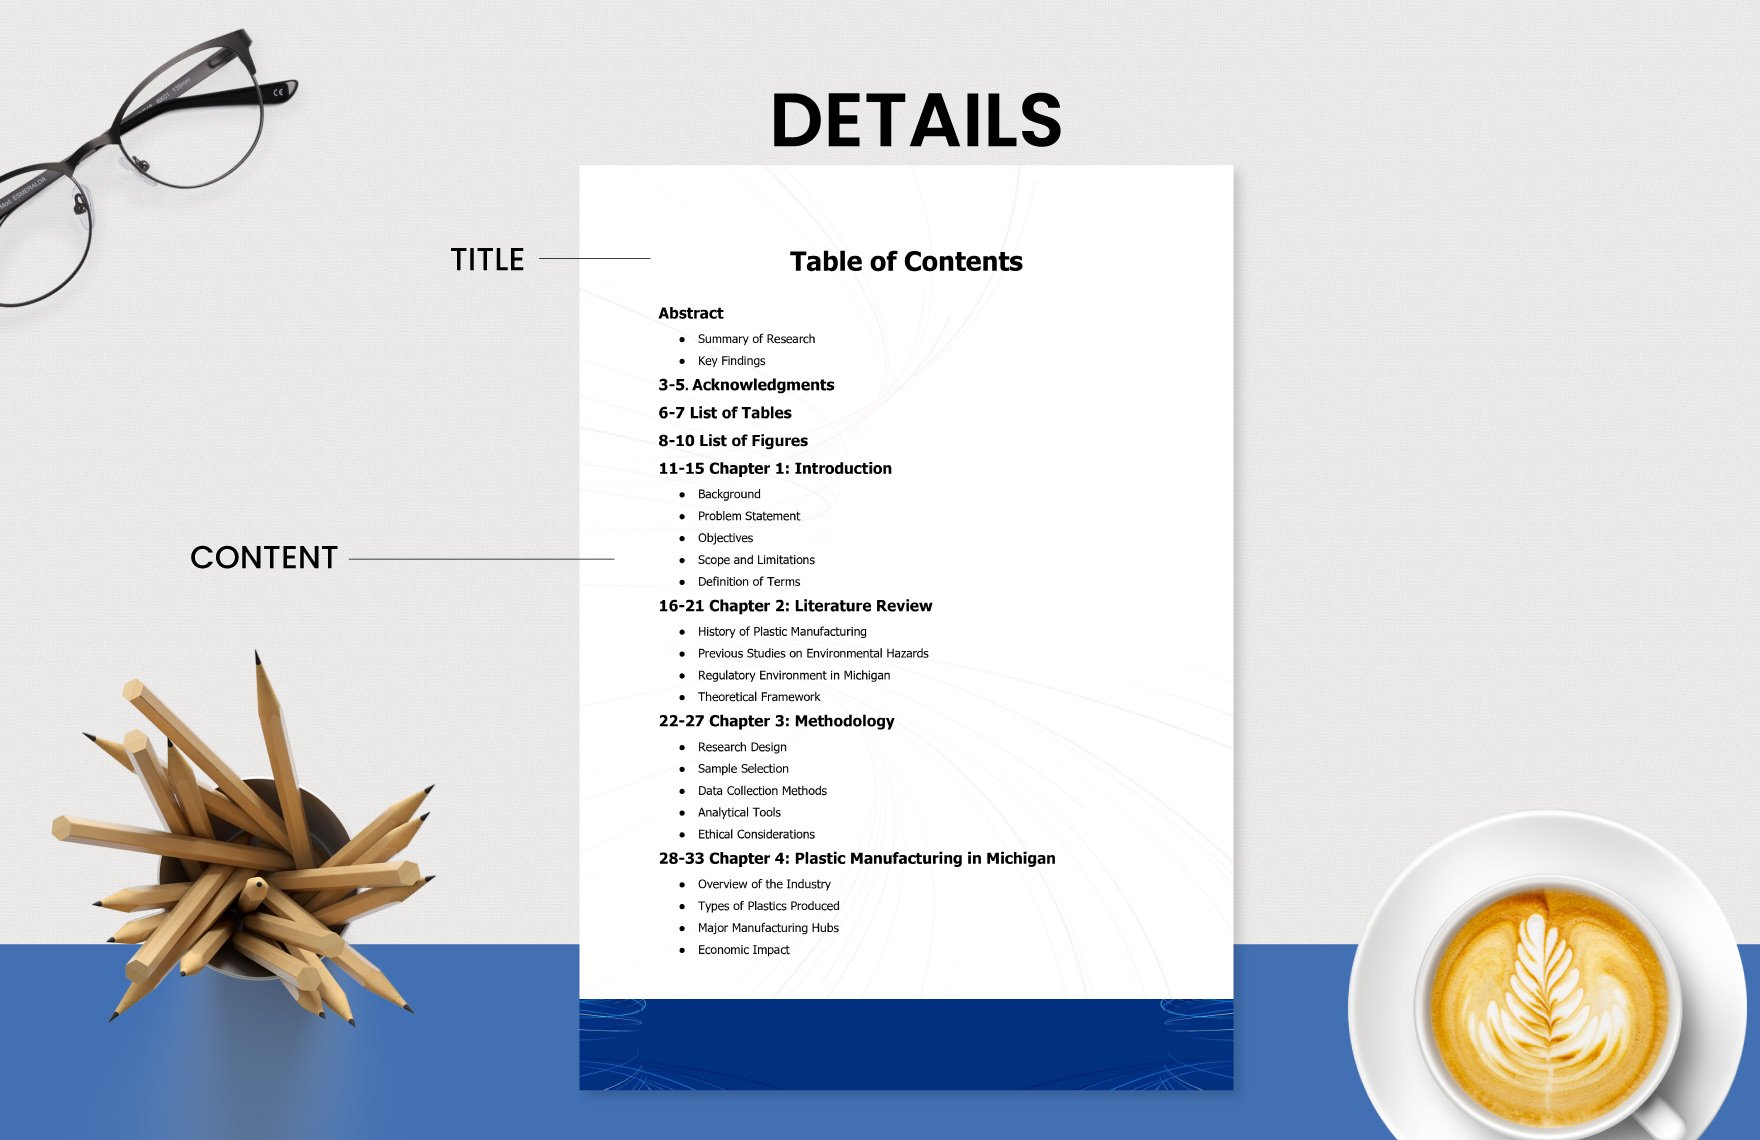 Project Table of Contents Template